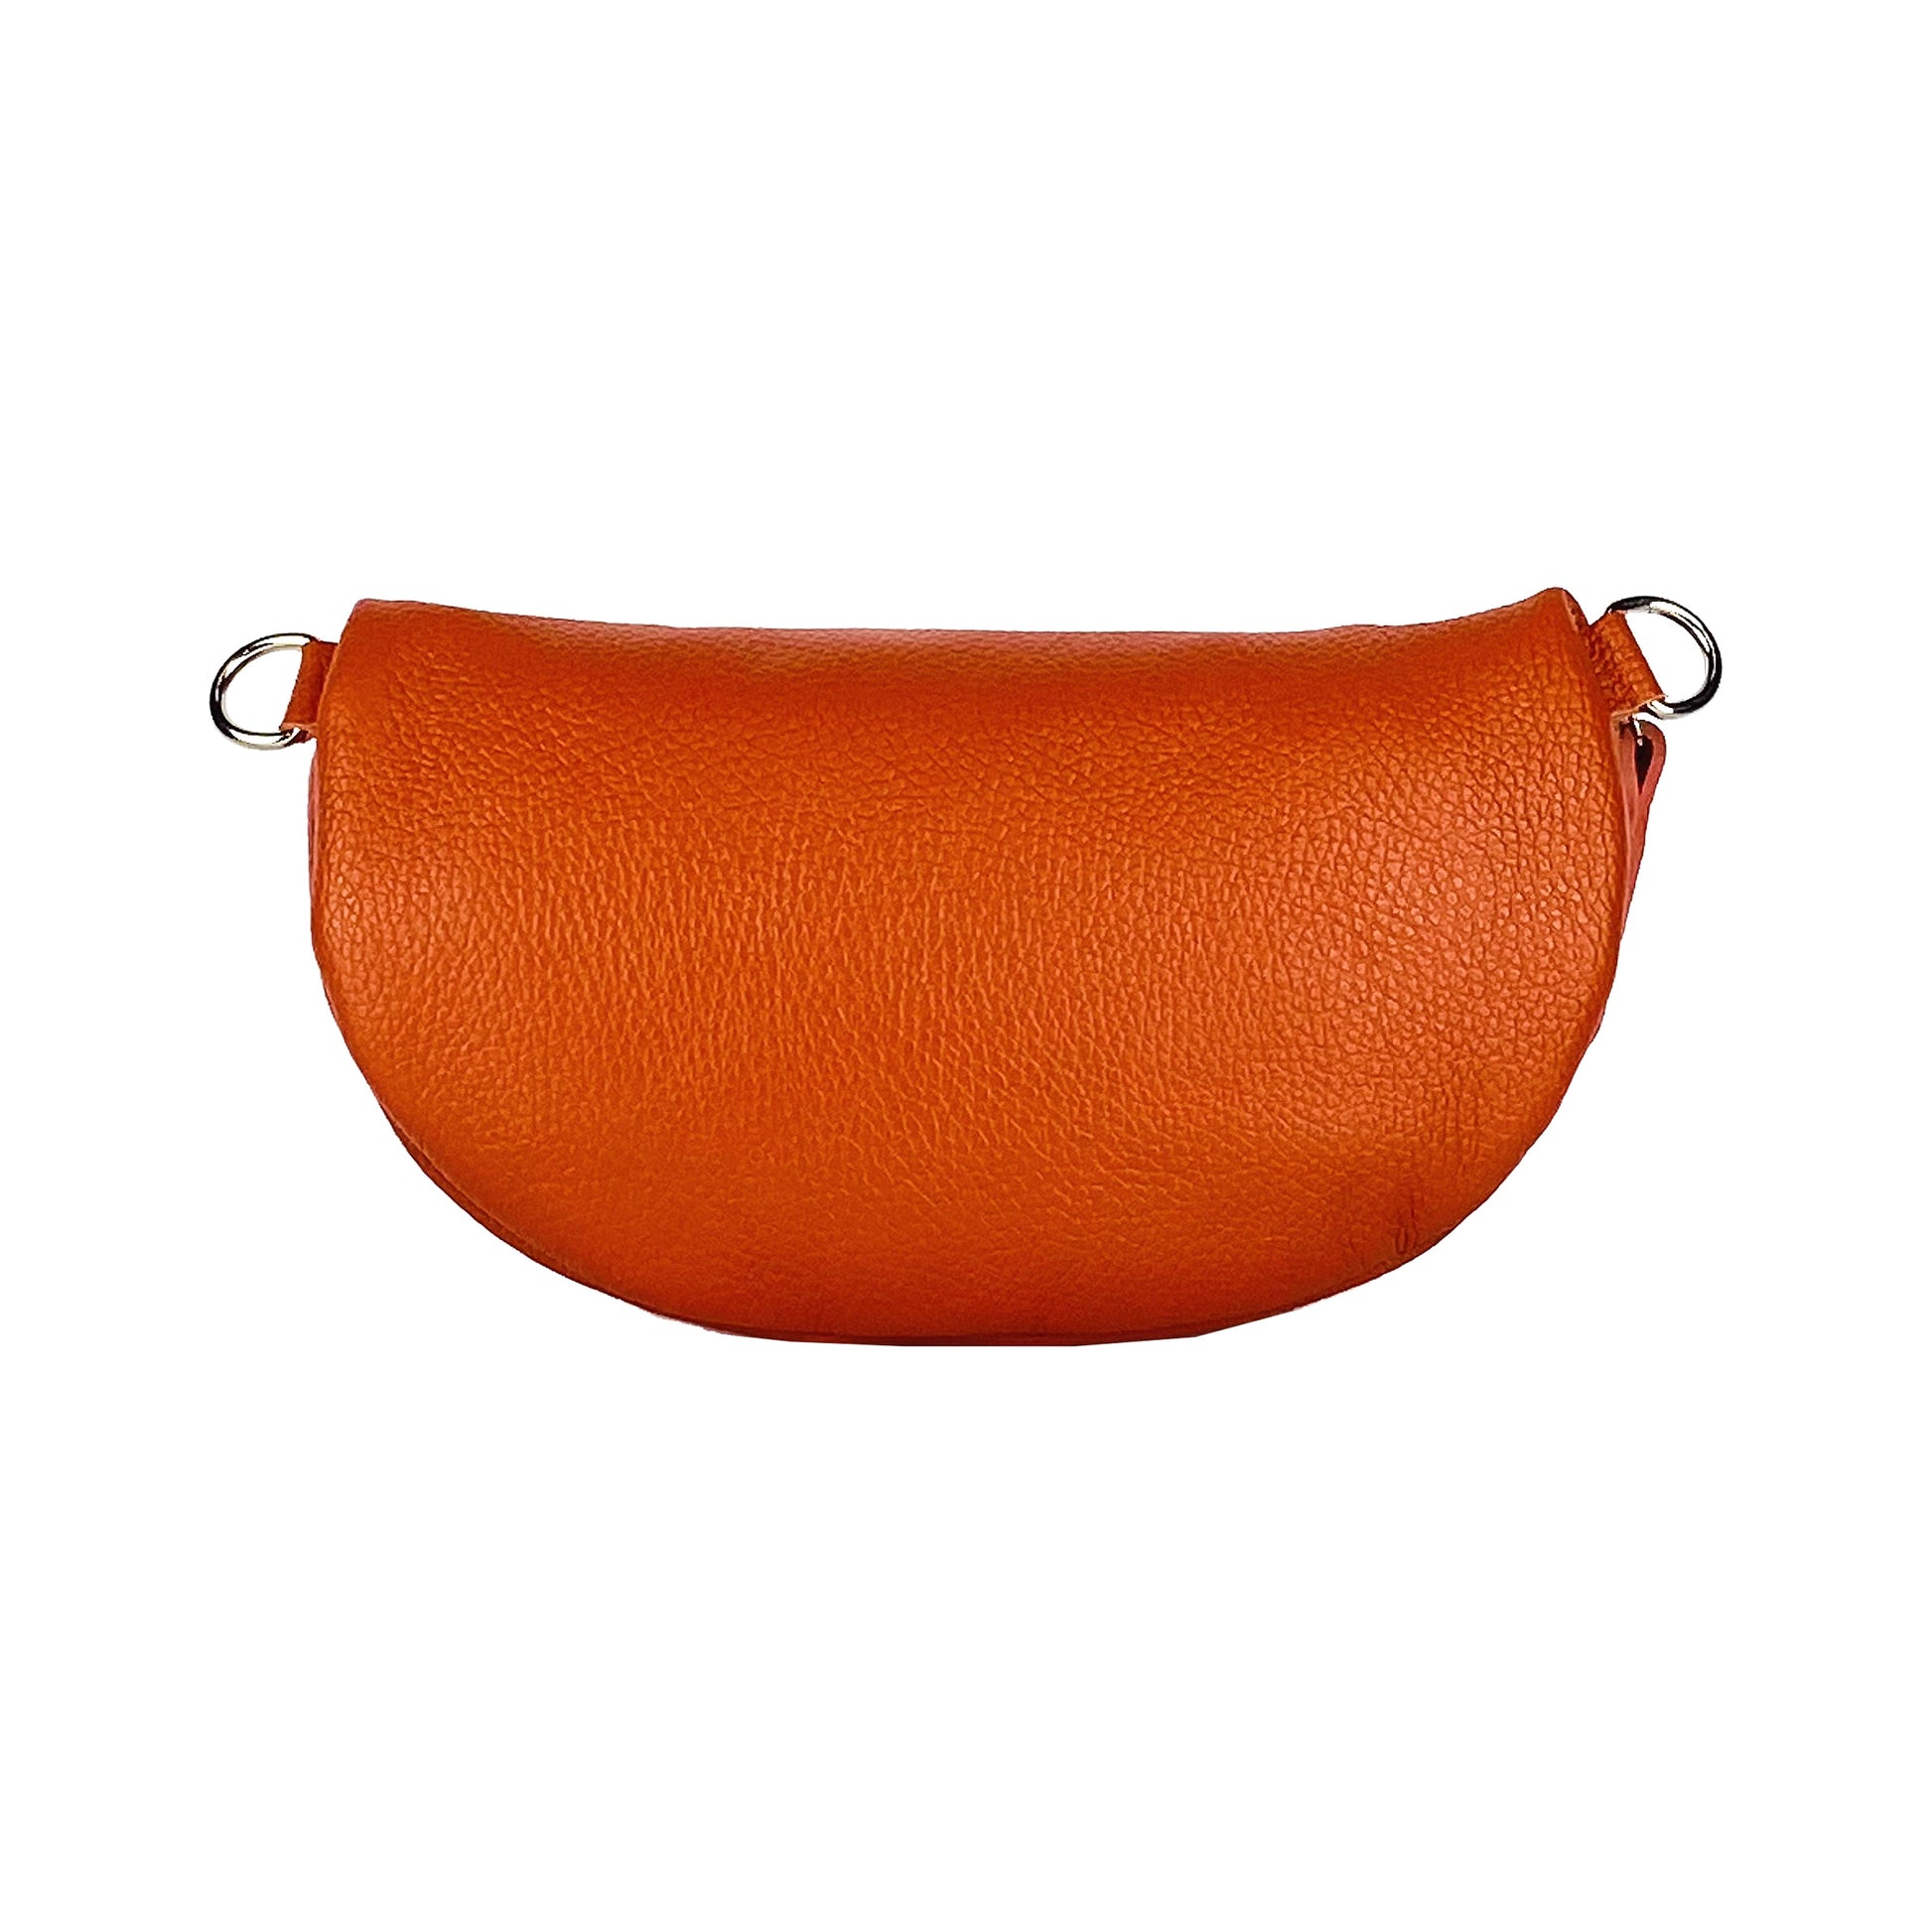 RB1015L | Waist bag with removable shoulder strap in Genuine Leather Made in Italy. Attachments with shiny nickel metal snap hooks - Orange color - Dimensions: 24 x 14 x 7-2